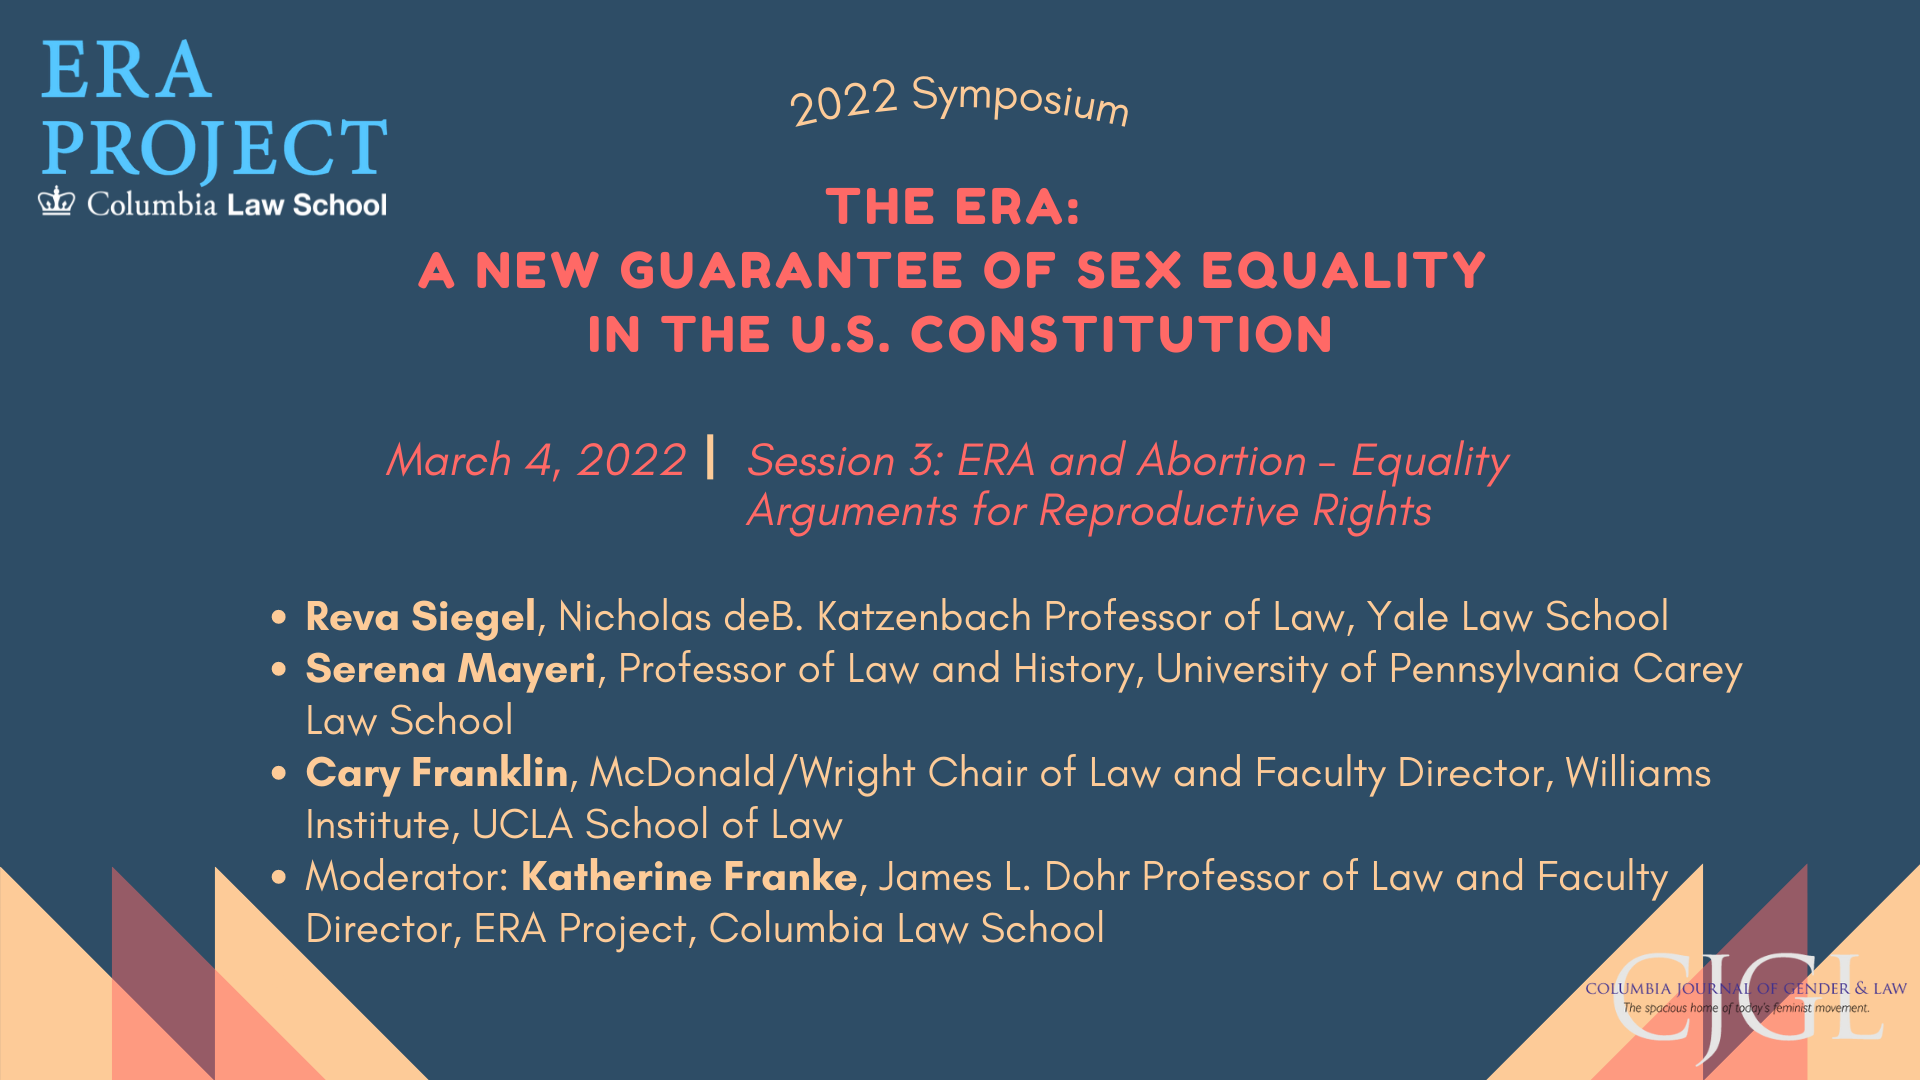 ERA Symposium - Session 3 - ERA and Abortion - Equality Arguments for Reproductive Rights